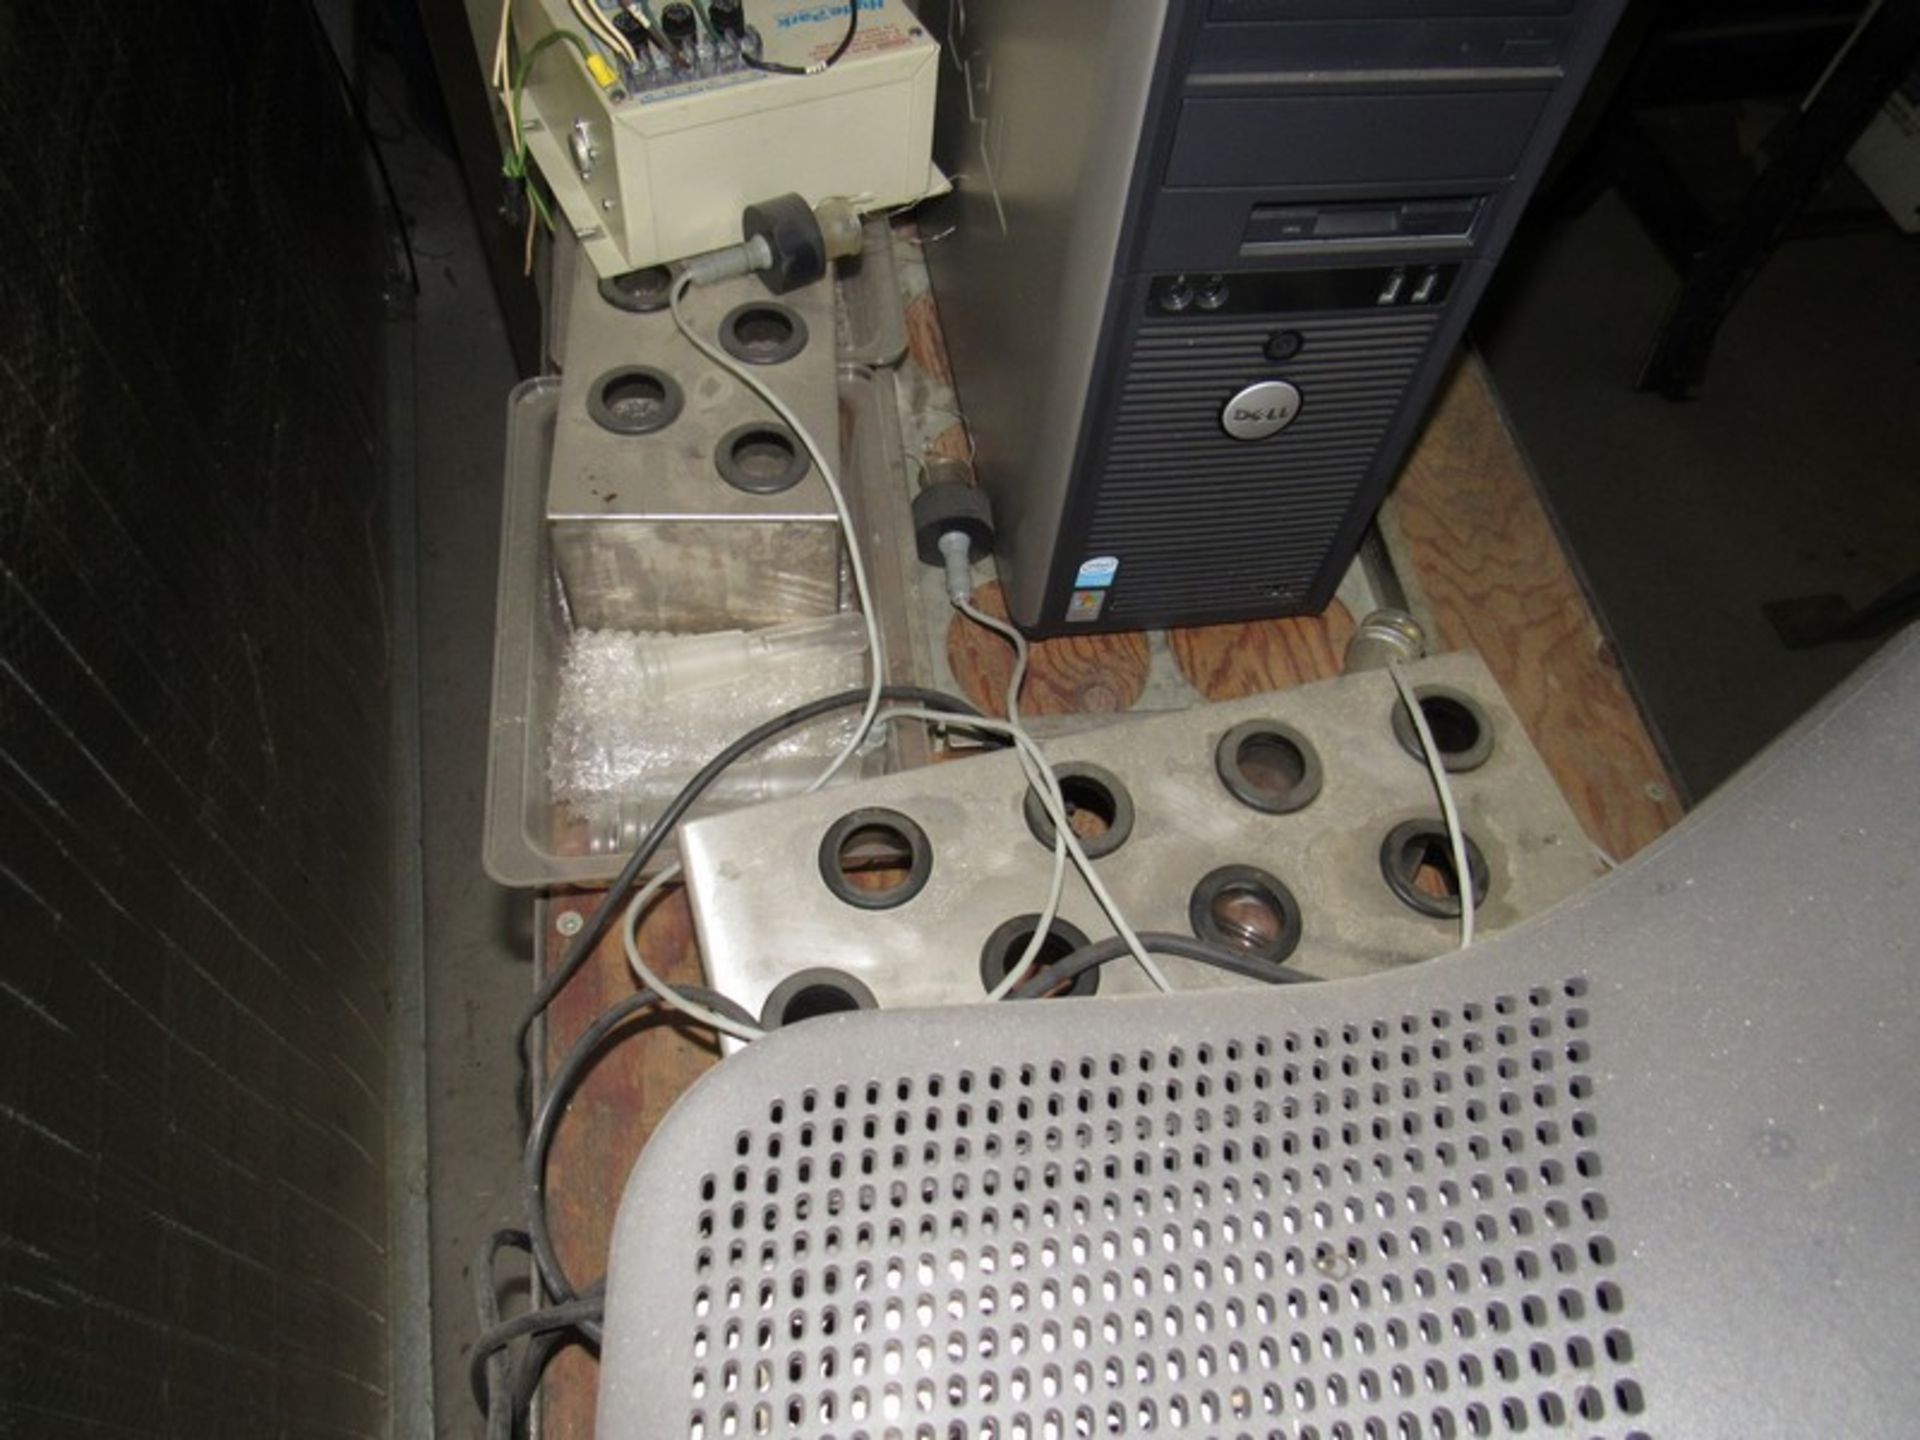 Electrolytic Respirometer Biodegradability Testing Machine with 16 Channel, computer and manuals. ( - Image 7 of 10